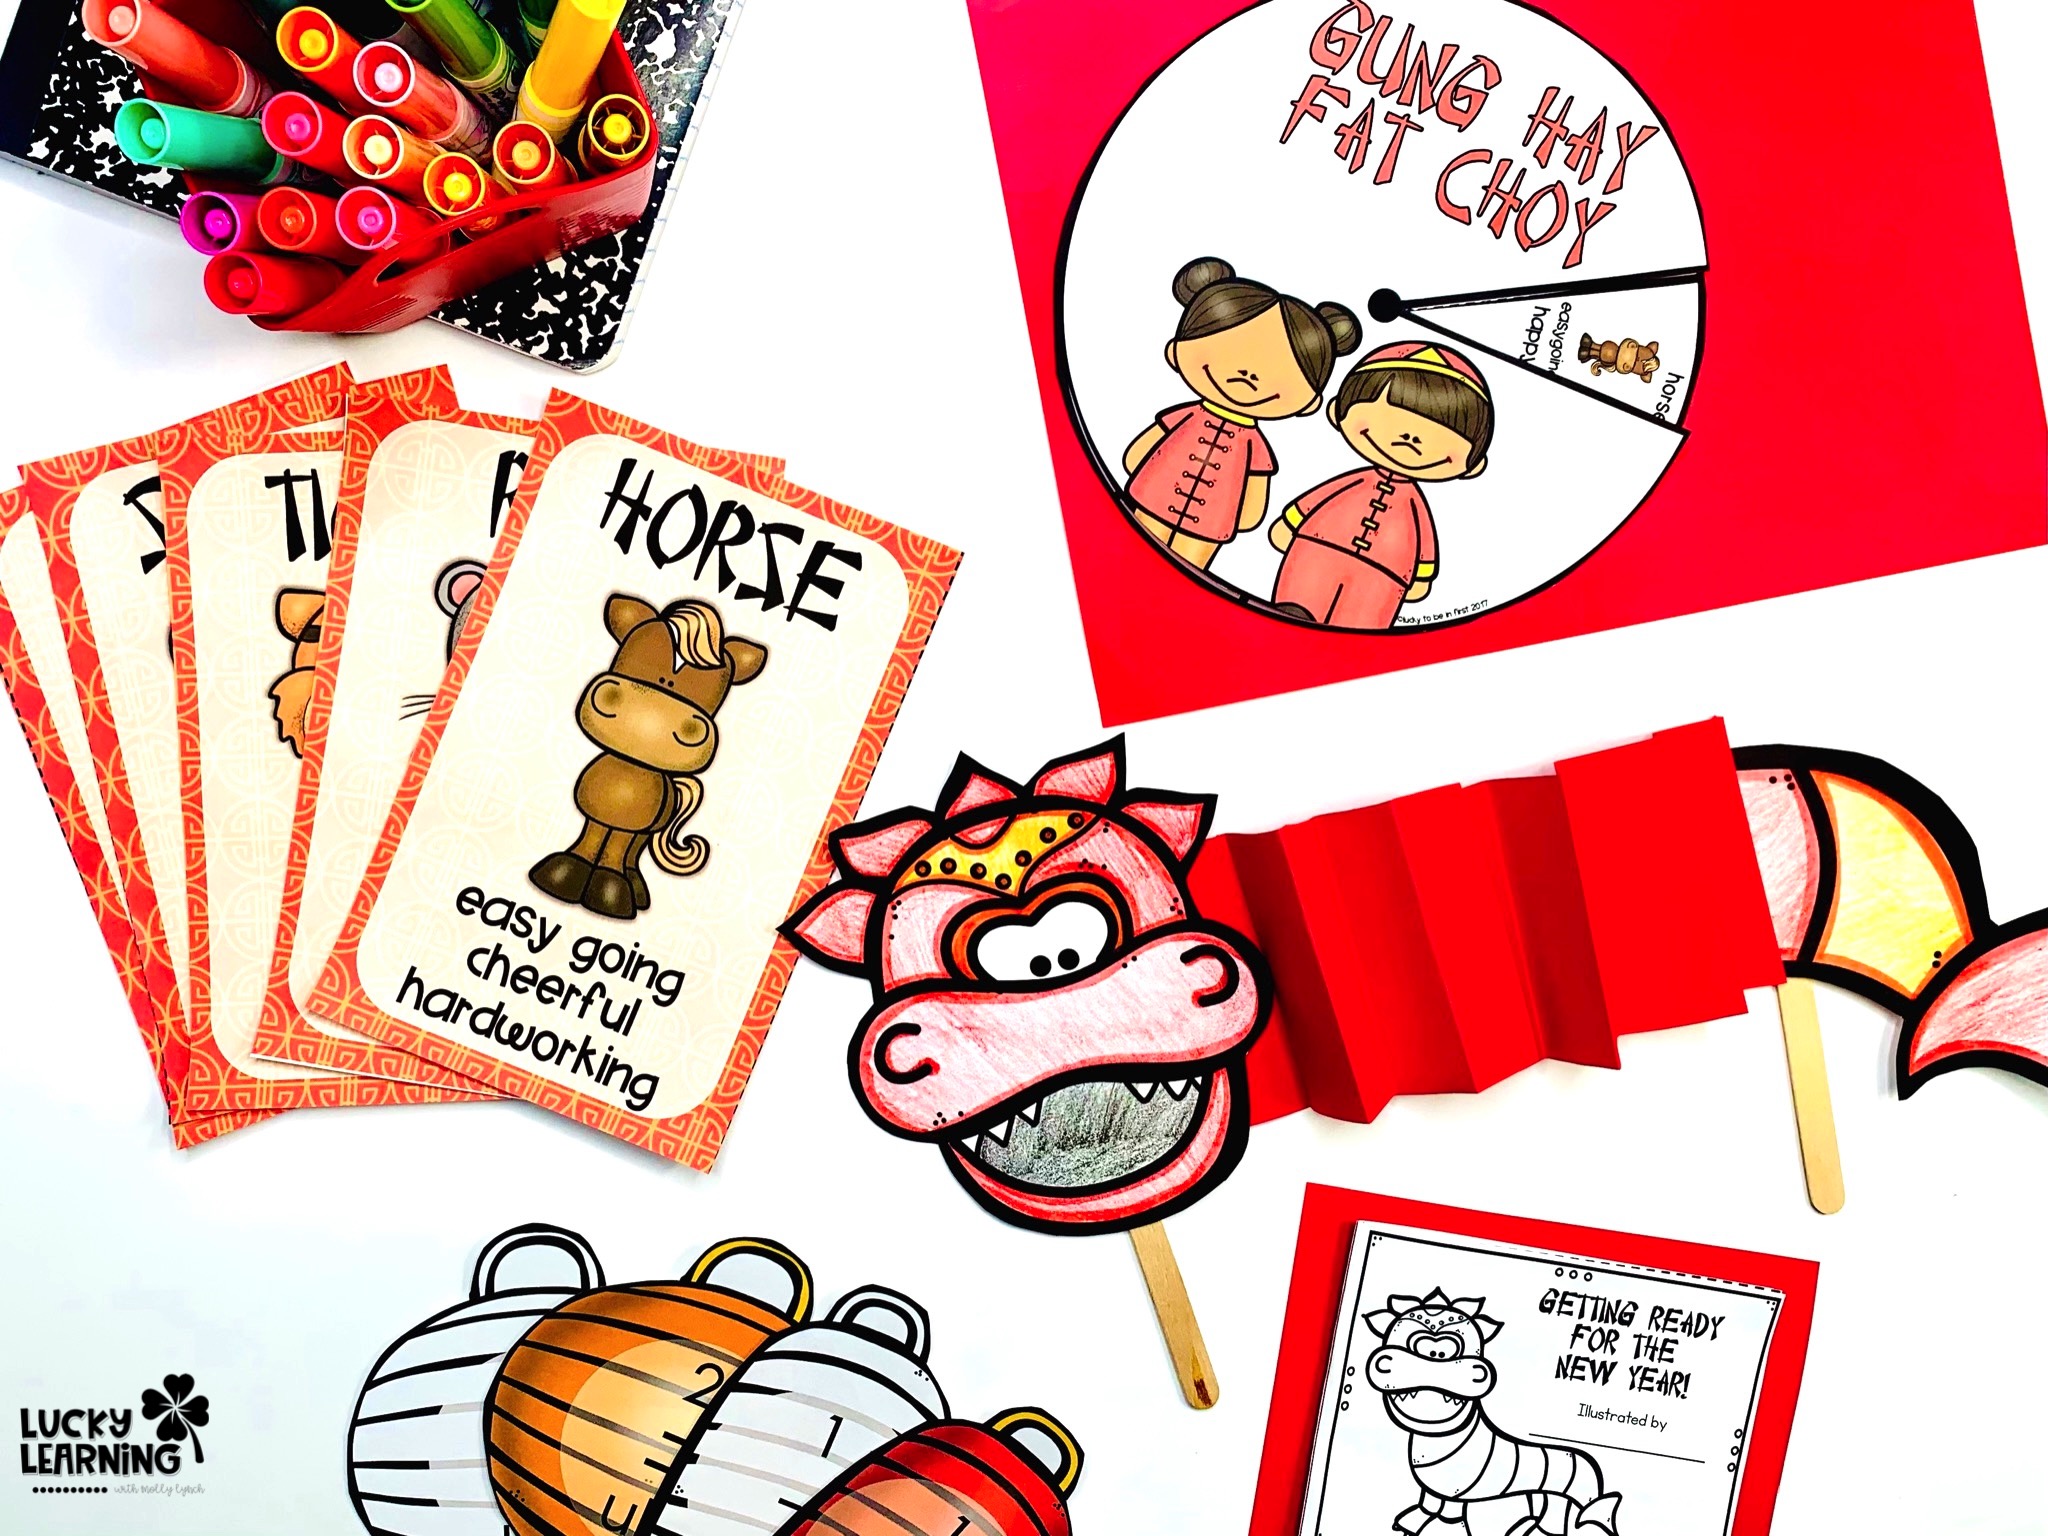 lunar new year mini book activity | Lucky Learning with Molly Lynch